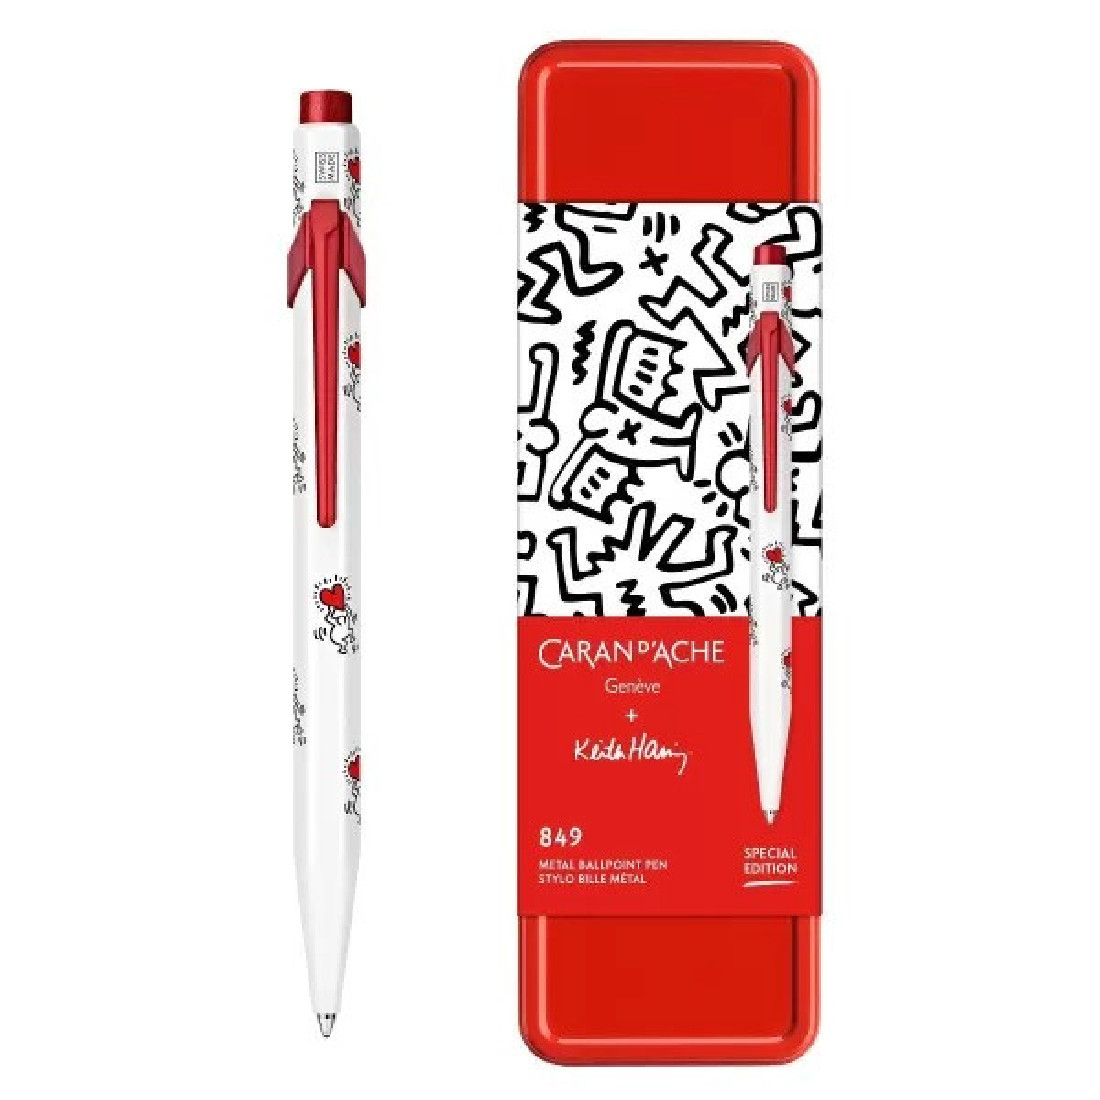 Caran DAche 849 Ballpoint  White - Special Edition 849.123 Keith Haring